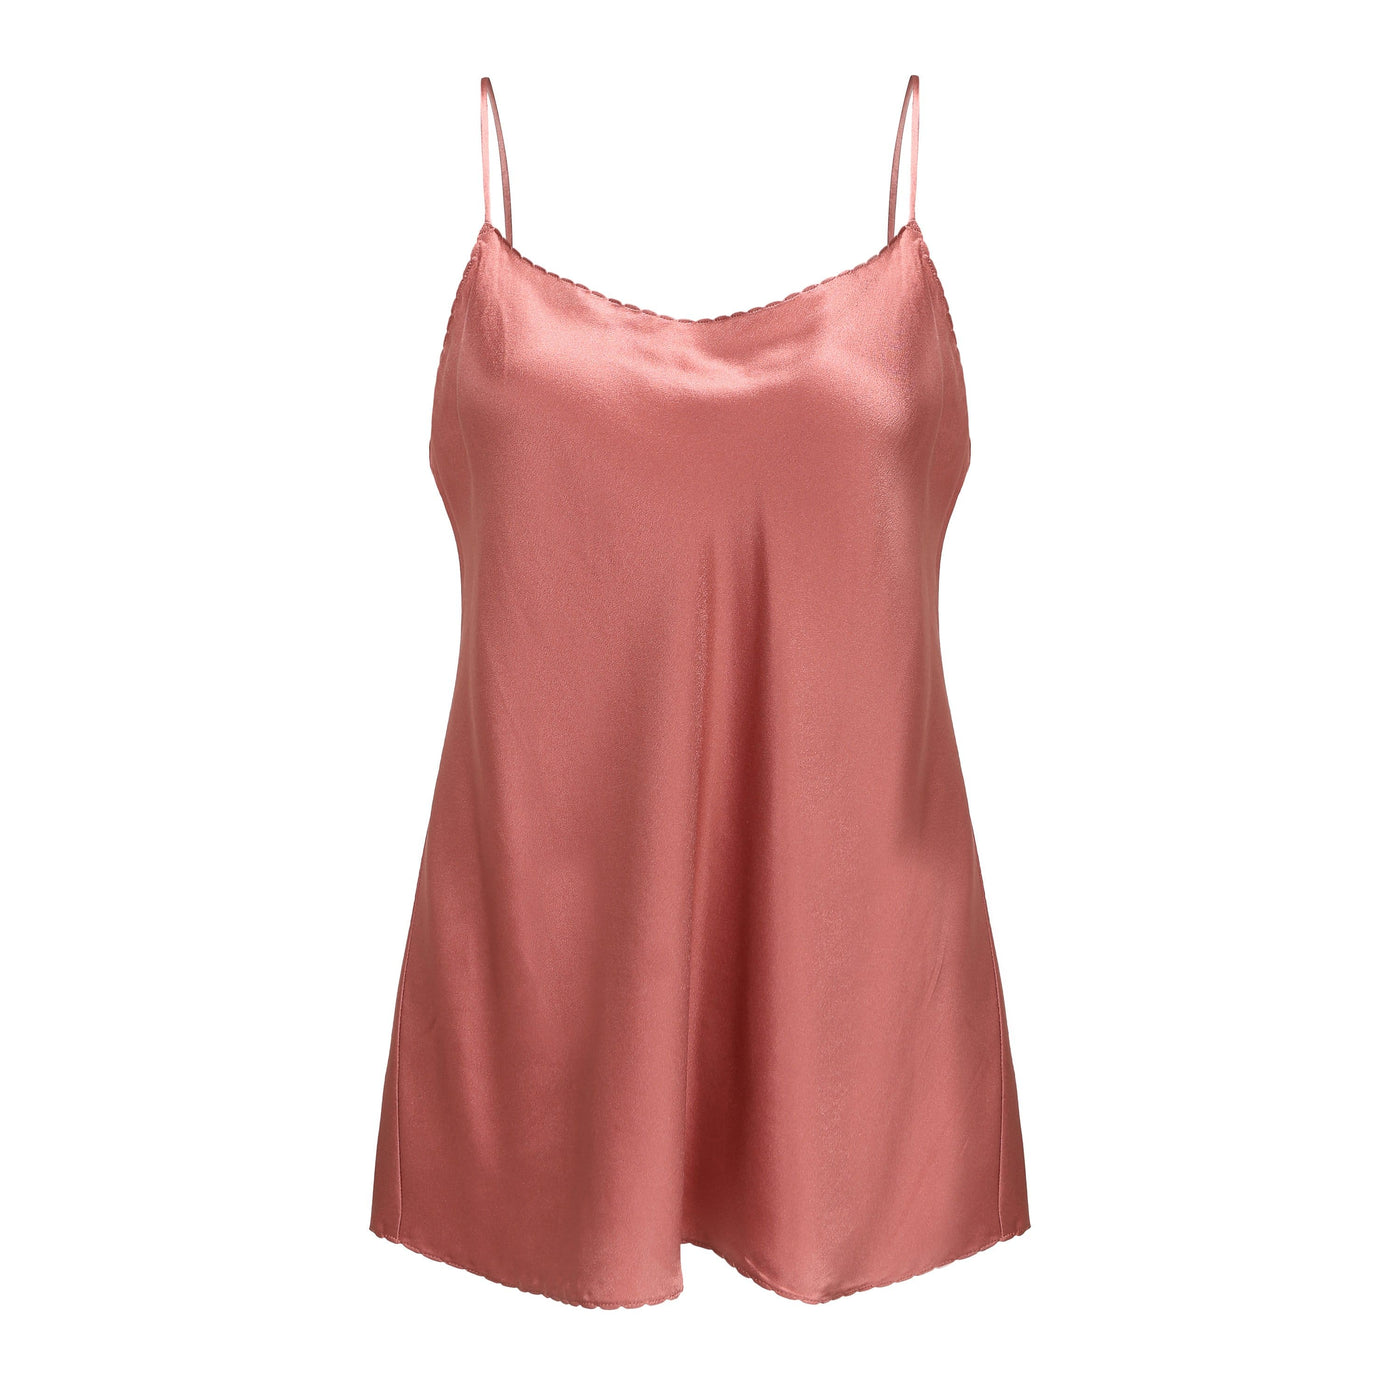 Lilly Pilly Collection bluesign® certified silk Eva Cami in Dusty Pink as 3D image showing front view